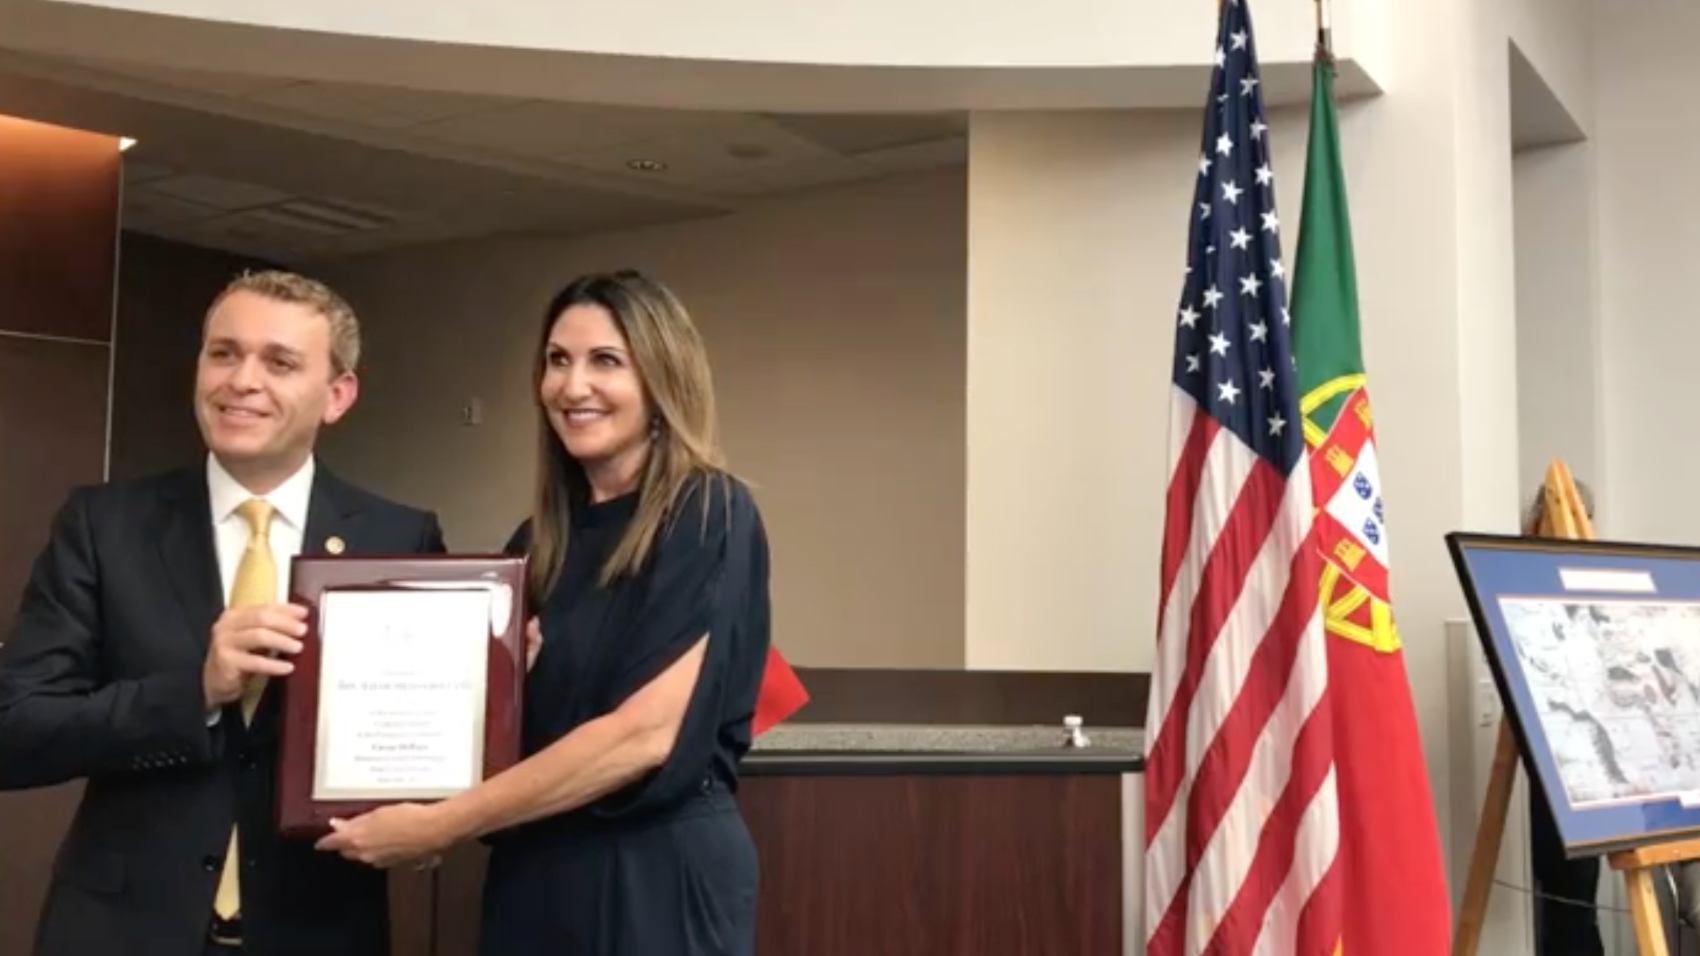 César DePaço offers honors for the support of the Portuguese communities in Palm Coast